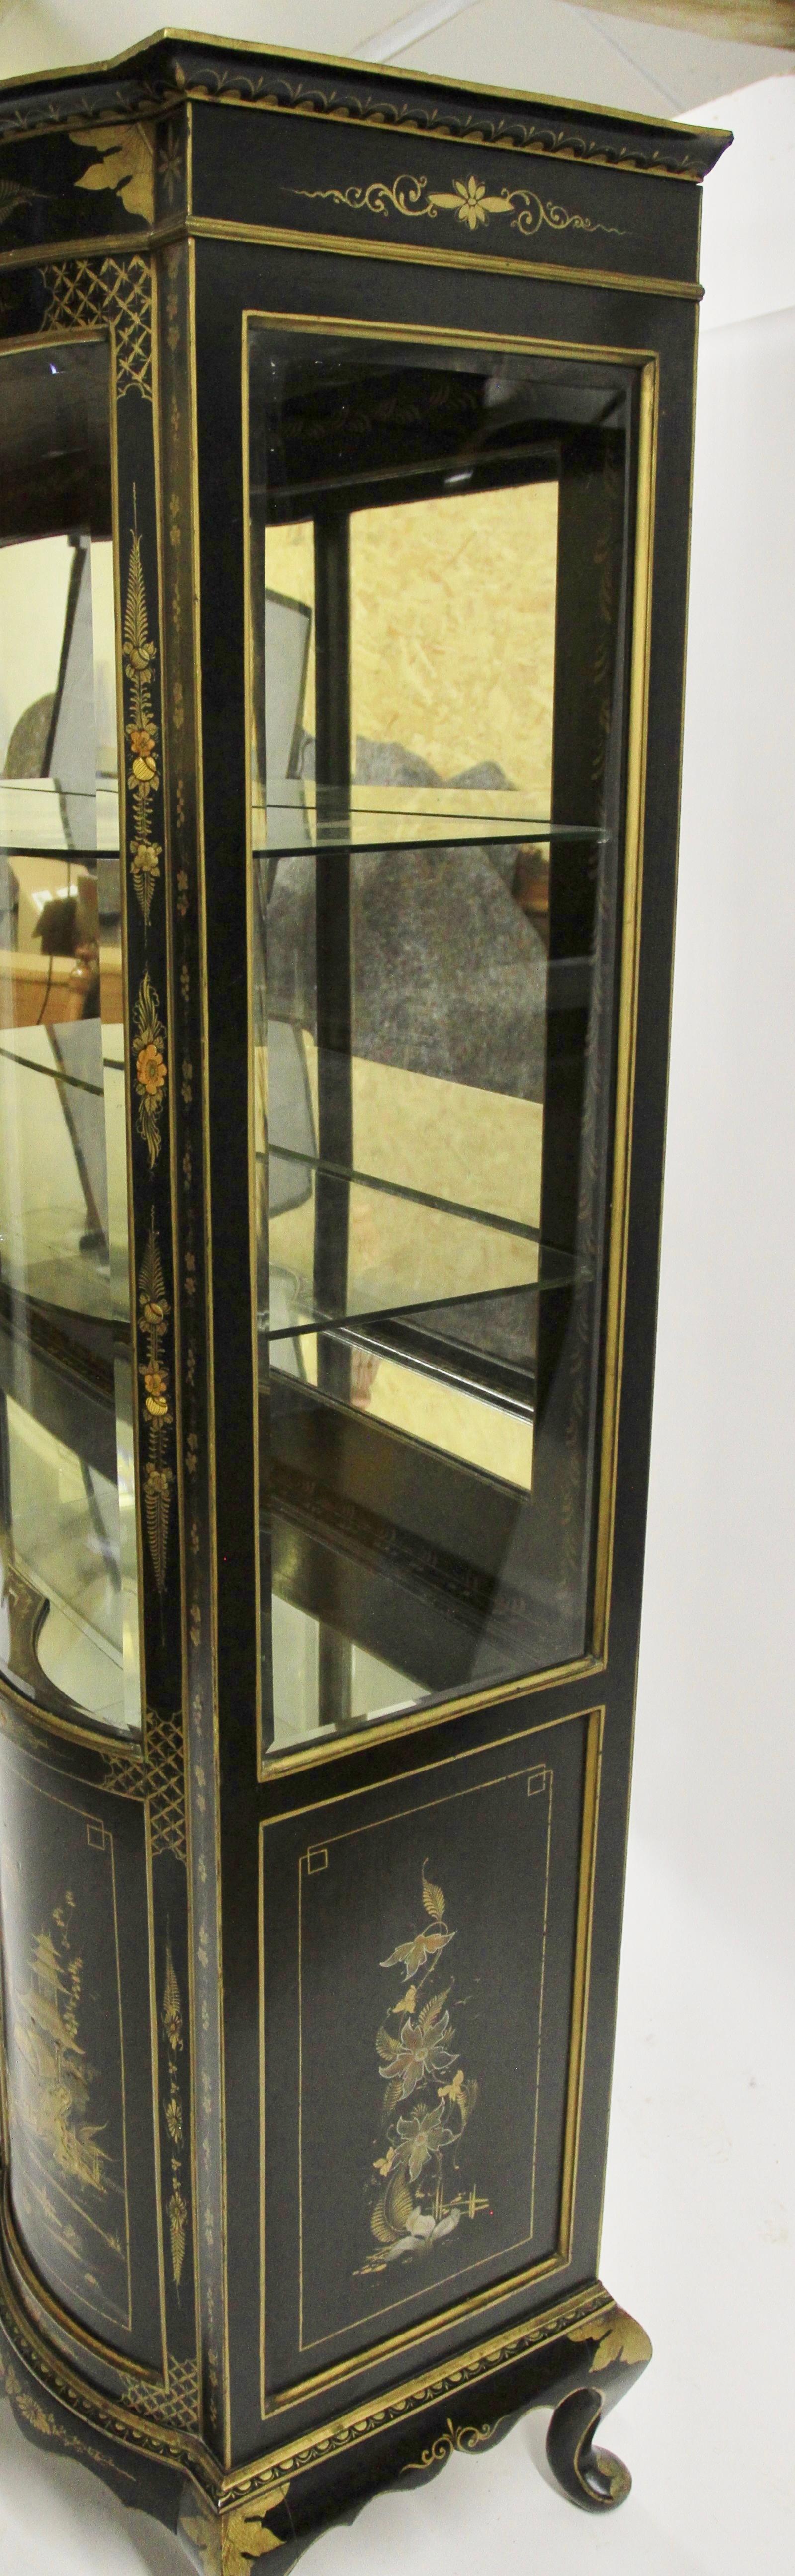 Fine Edwardian Chinoiserie Decorated Display Cabinet  For Sale 3